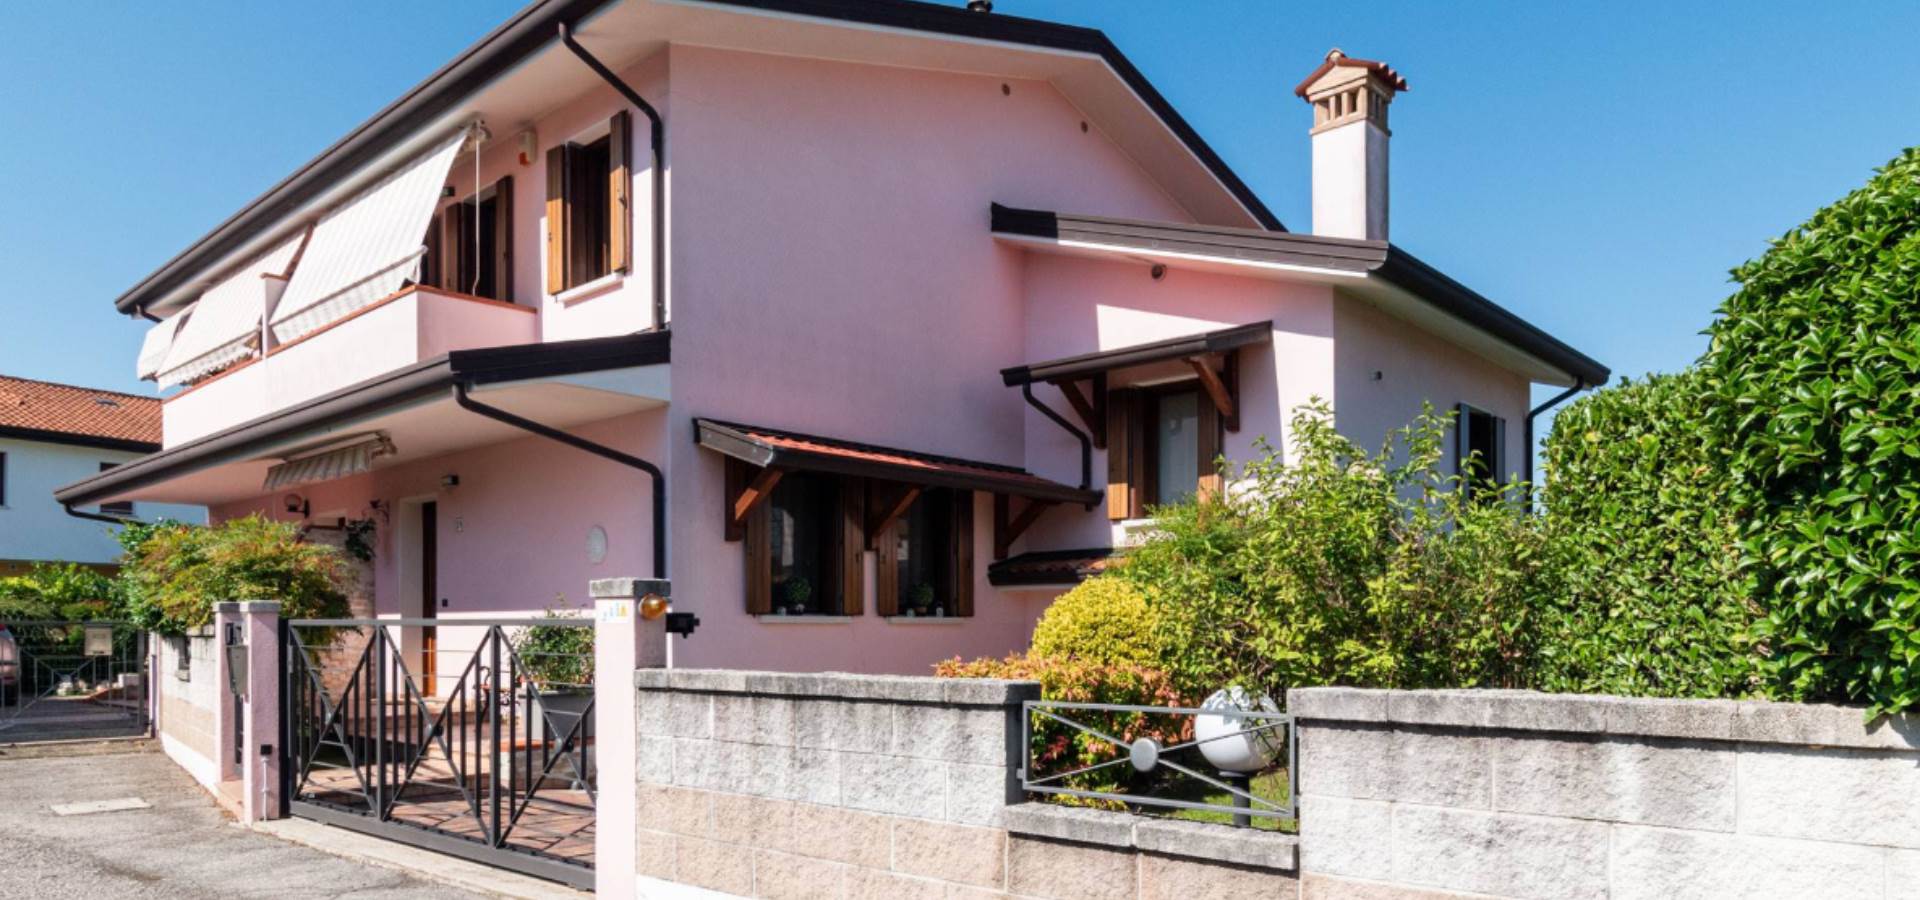 PORTOGRUARO, Duplex villa for sale of 135 Sq. mt., Excellent Condition, Heating Individual heating system, Energetic class: E, placed at Raised, composed by: 7 Rooms, Show cooking, , 3 Bedrooms, 2 